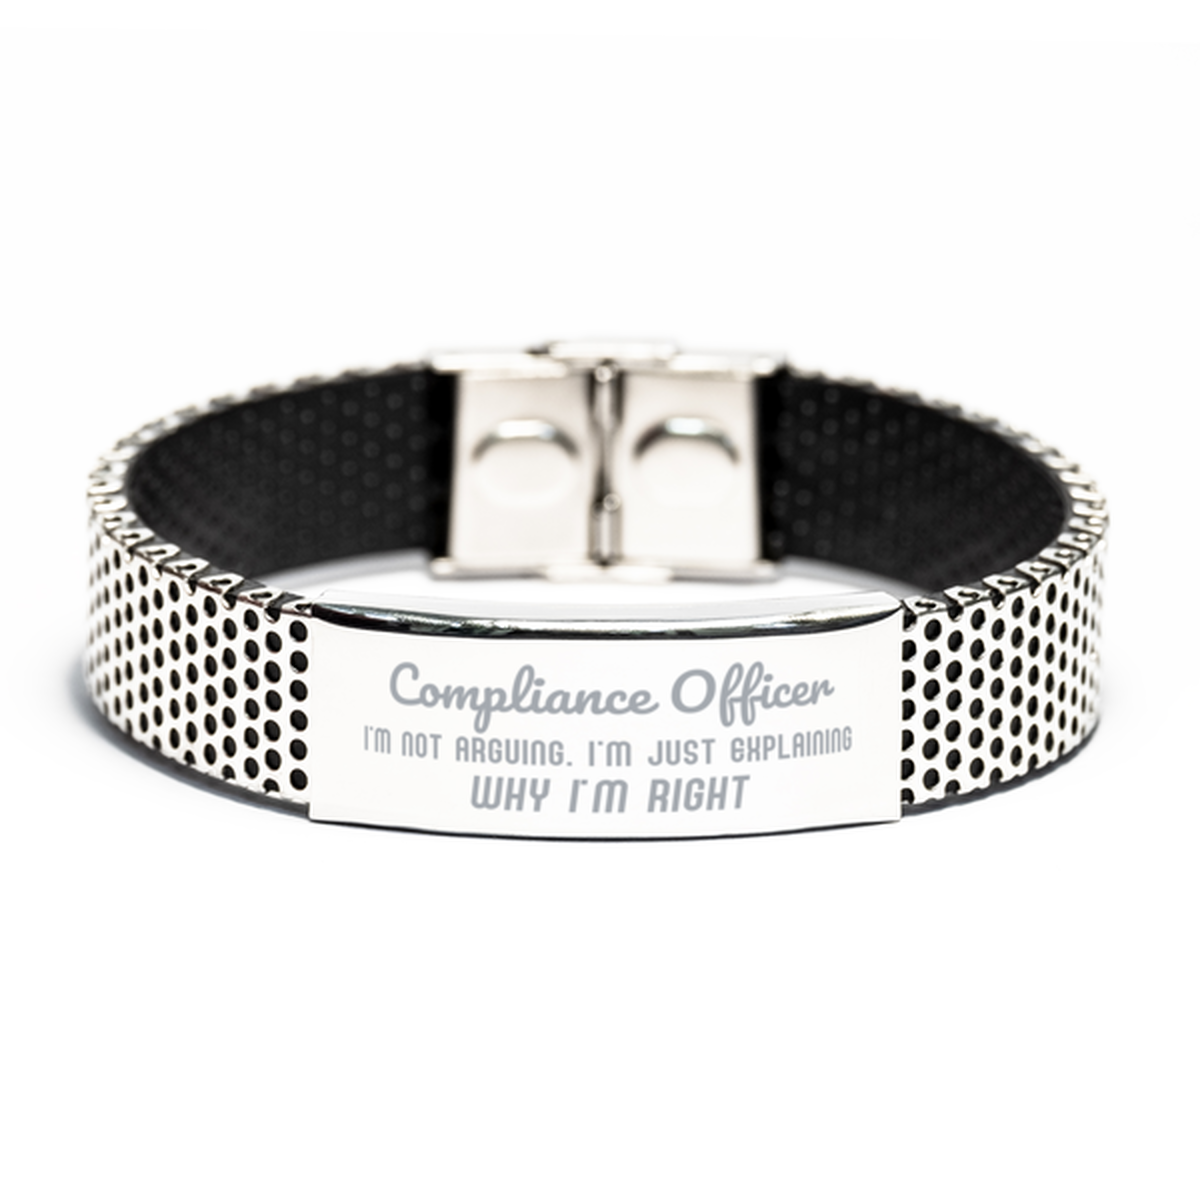 Compliance Officer I'm not Arguing. I'm Just Explaining Why I'm RIGHT Stainless Steel Bracelet, Funny Saying Quote Compliance Officer Gifts For Compliance Officer Graduation Birthday Christmas Gifts for Men Women Coworker